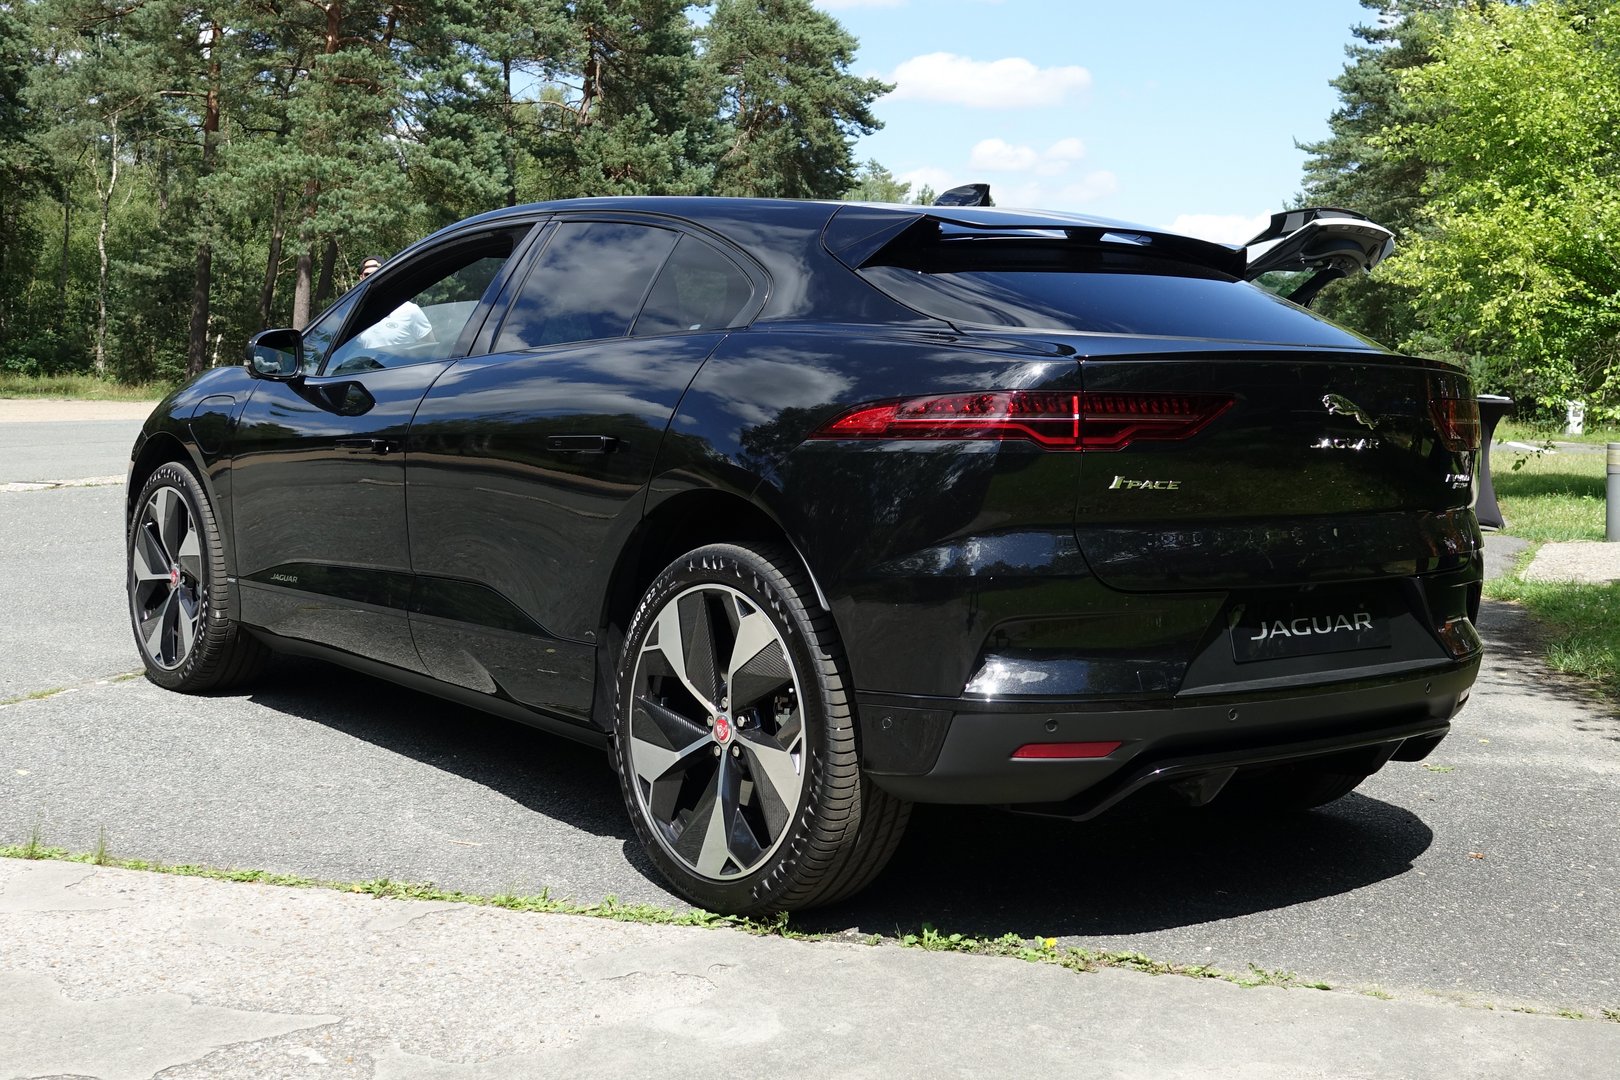 image Jaguar cars to go all-electric by 2025